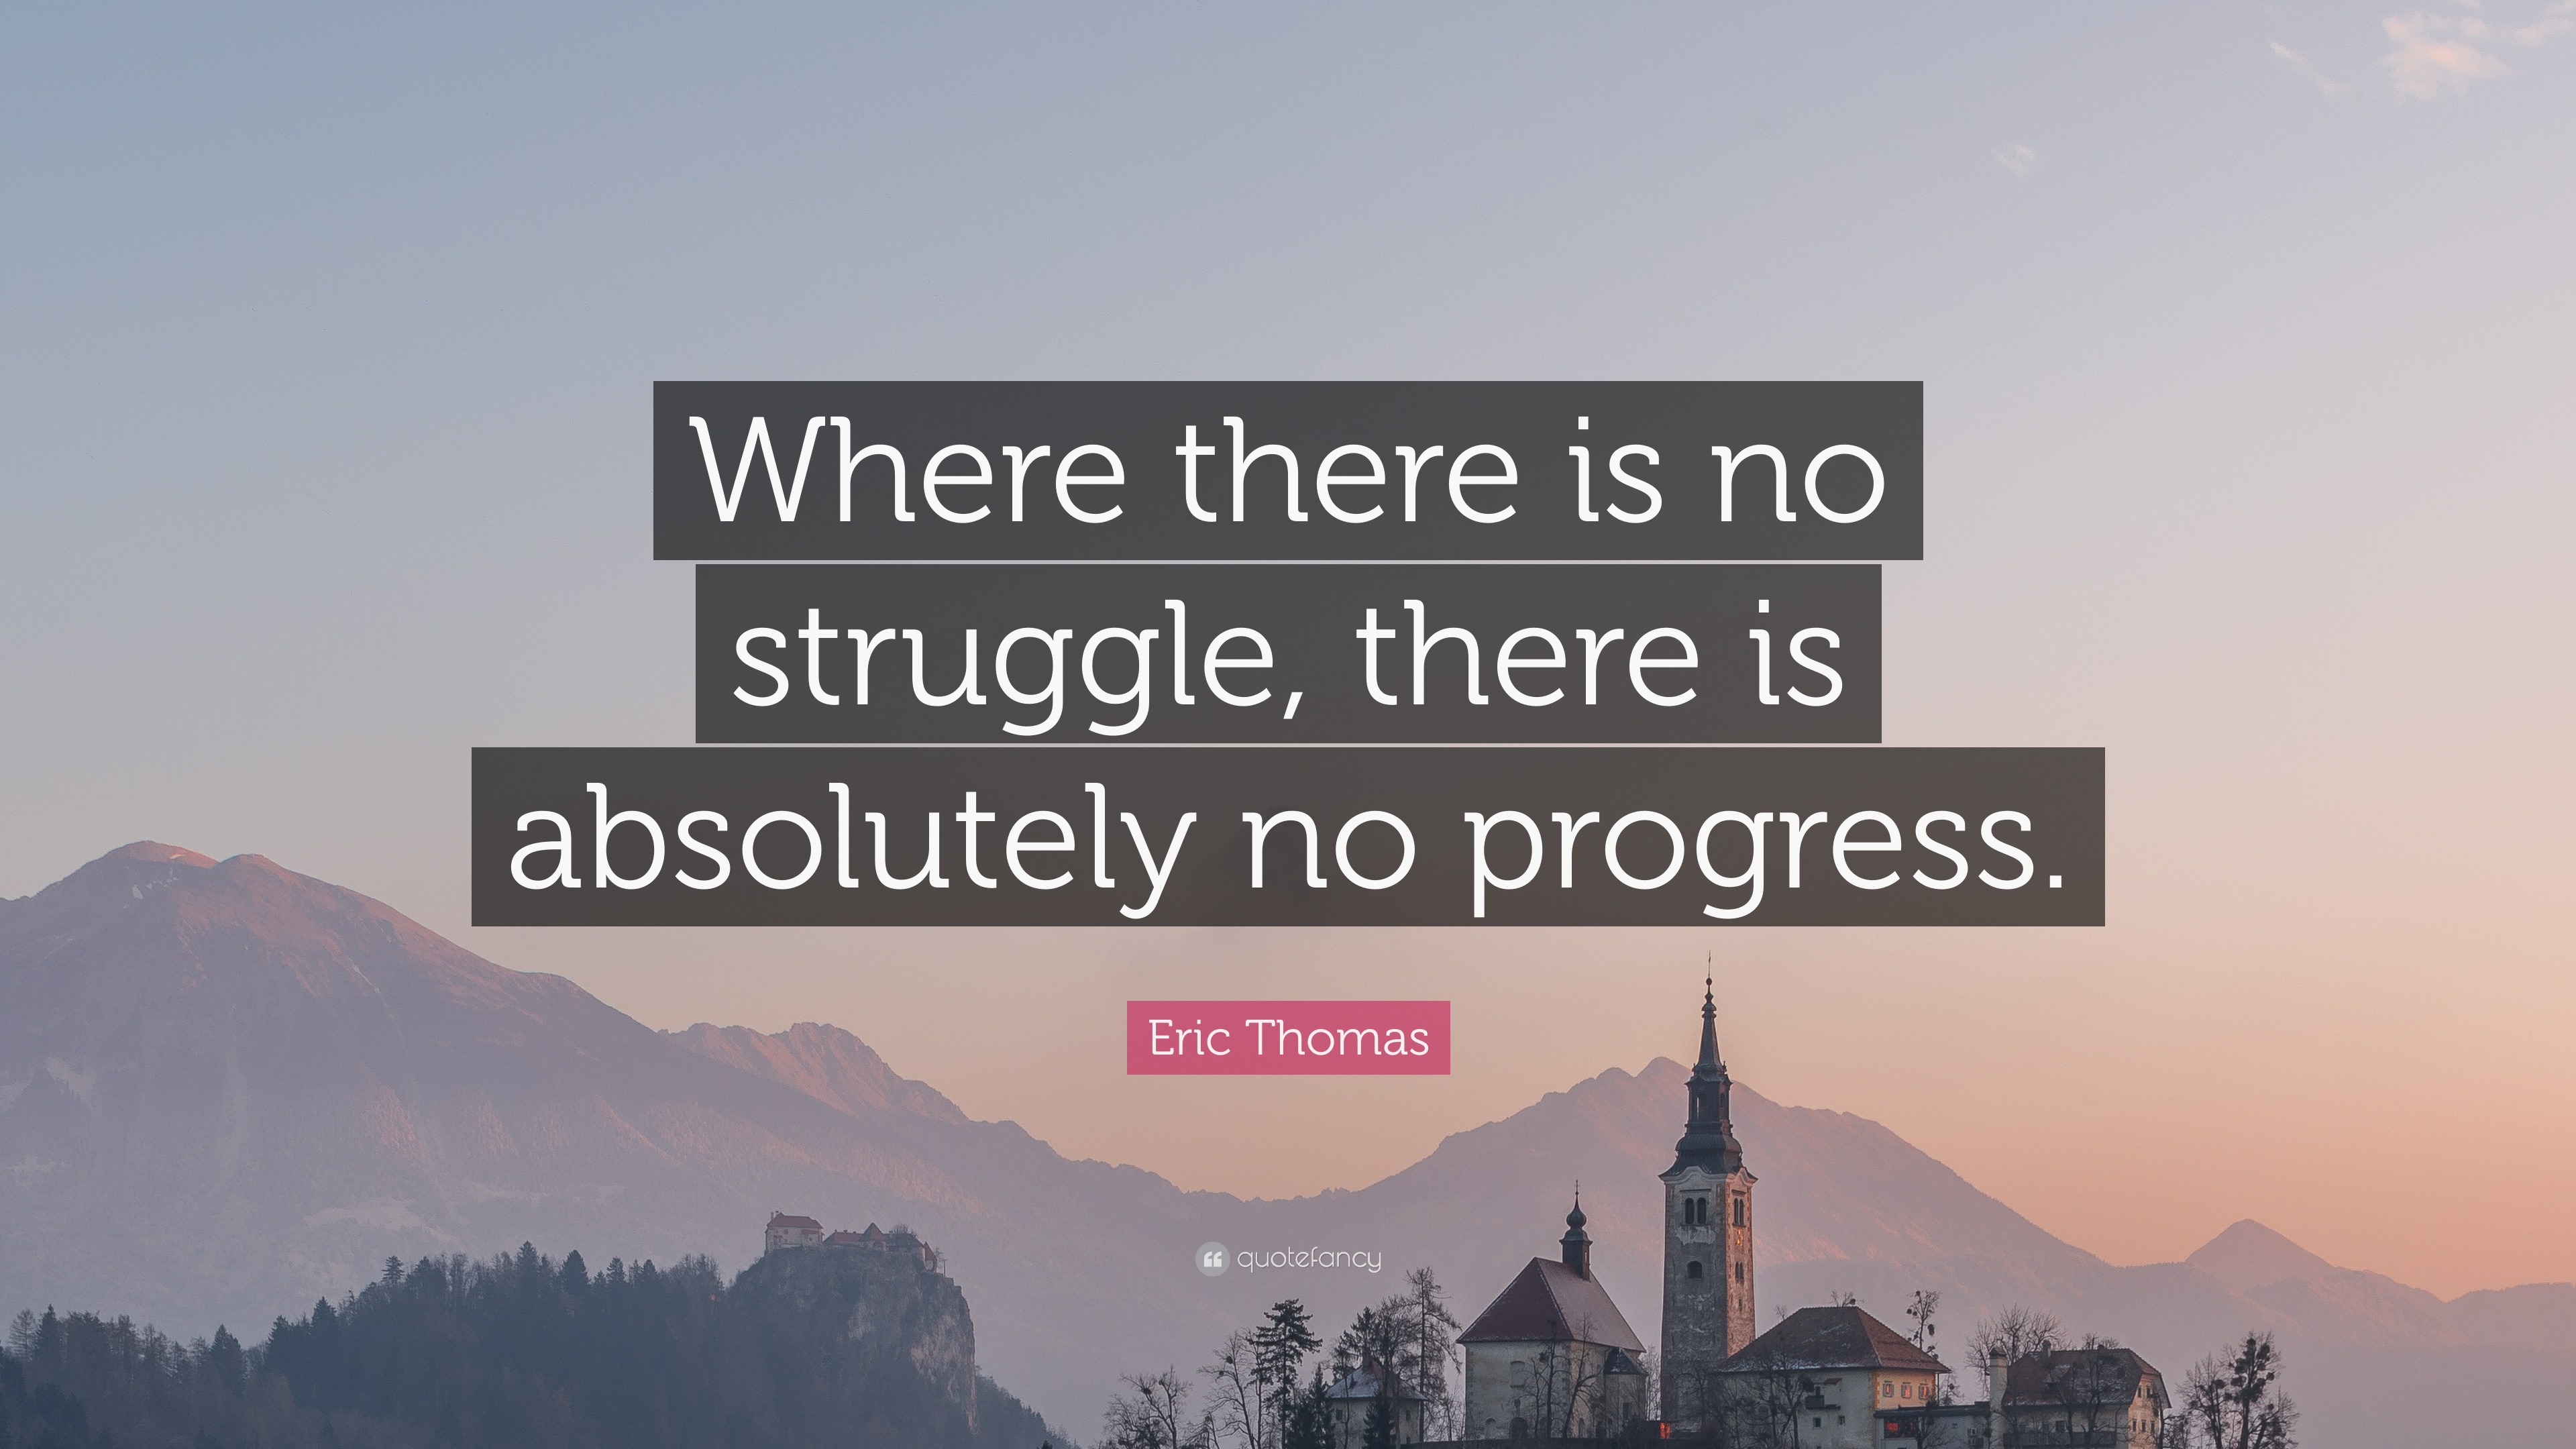 If There Is No Struggle There Is No Progress Essay